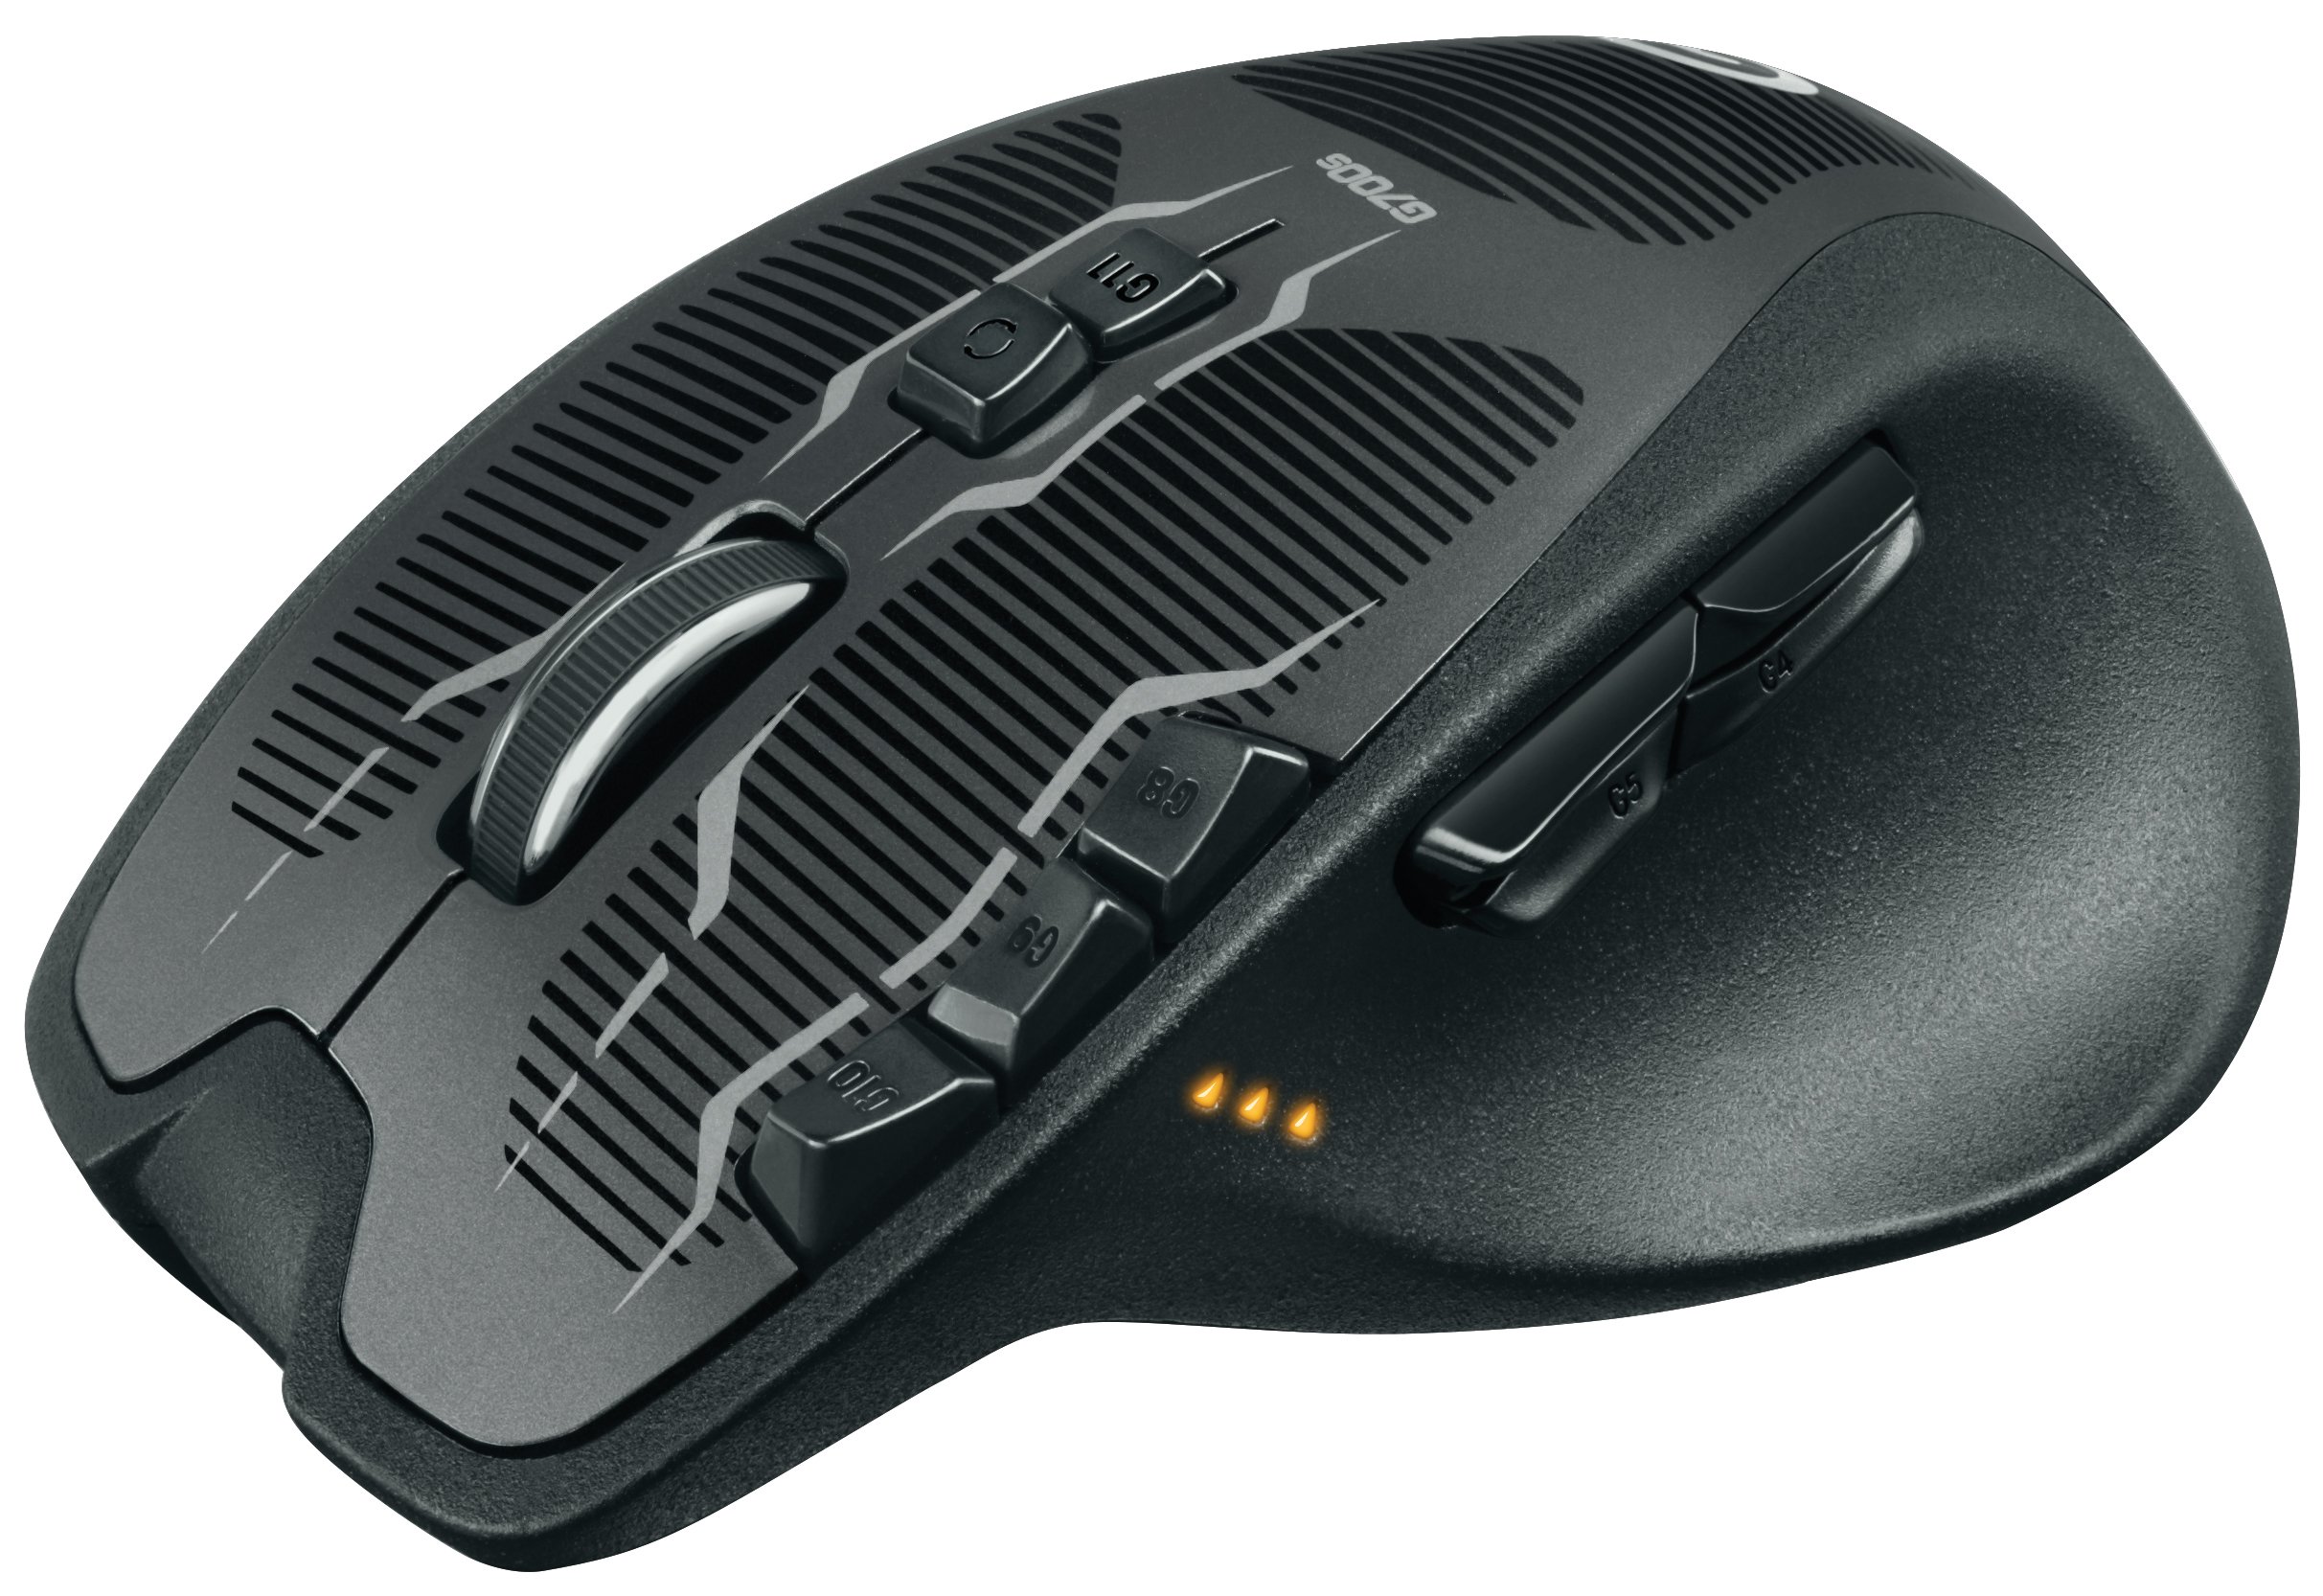 How To Clean Logitech G700 Mouse